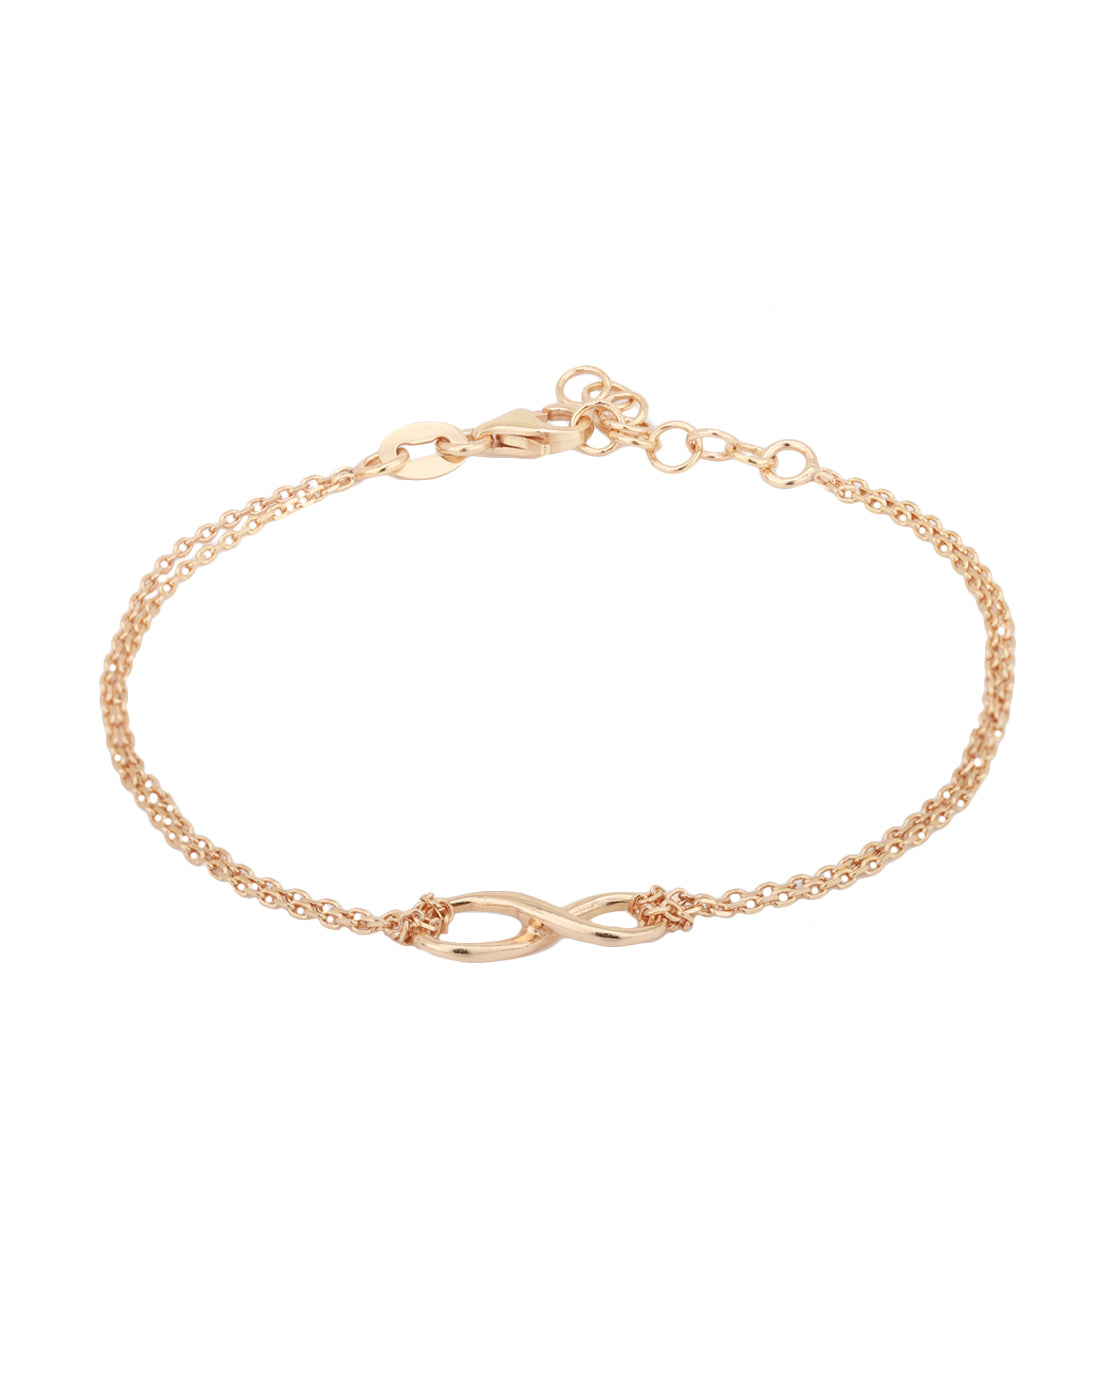 Infinity Cord Bracelet in Gold Plating | Forever My